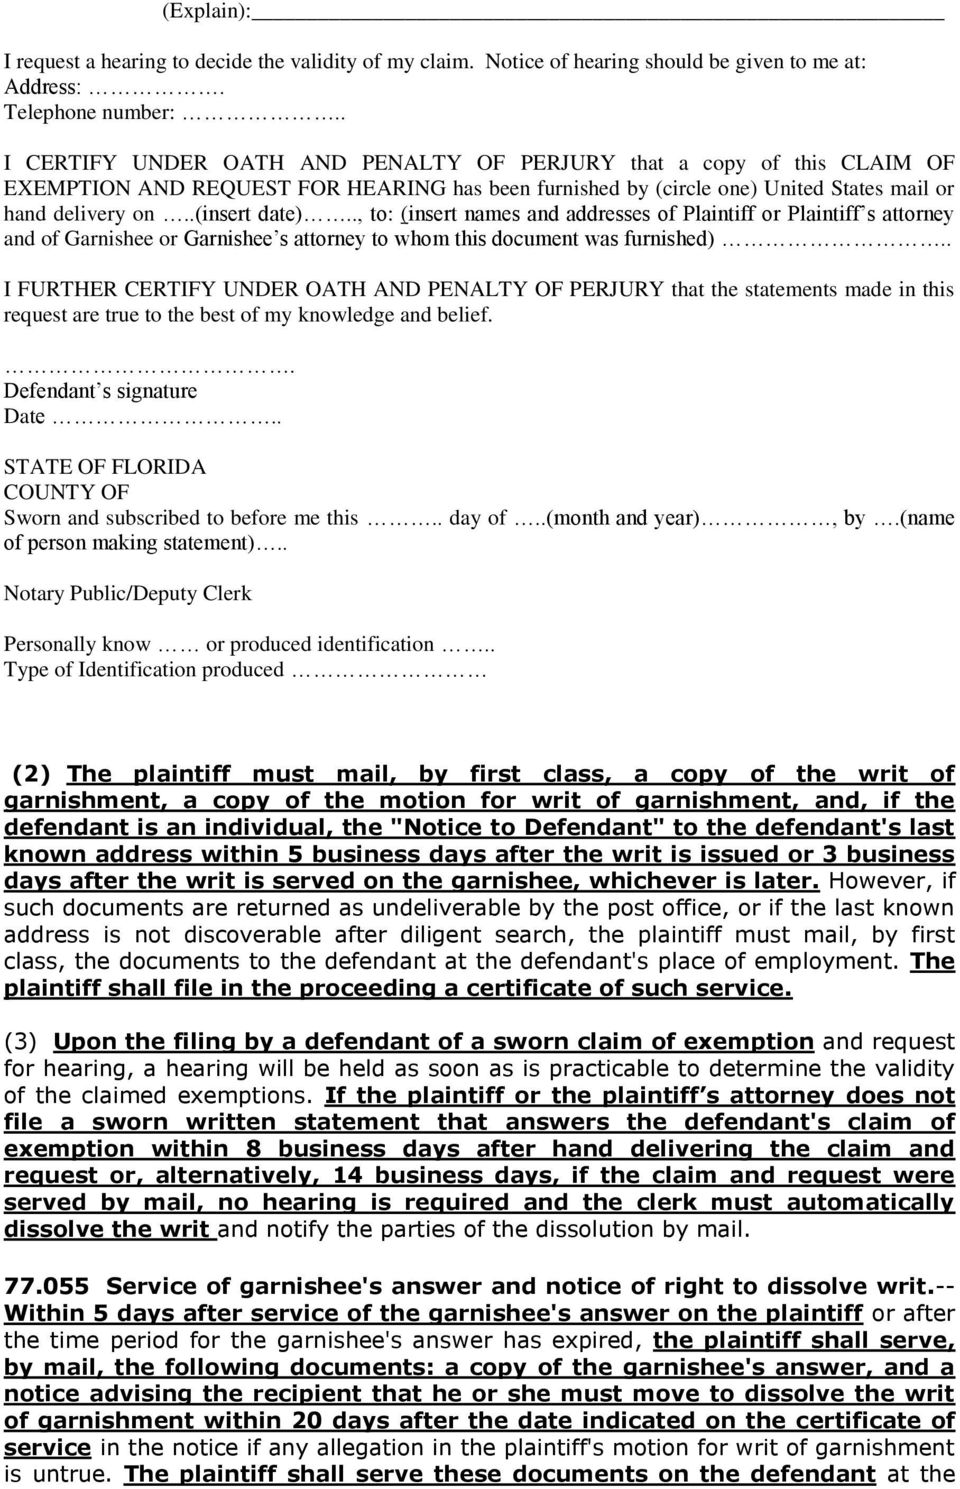 ., to: (insert names and addresses of Plaintiff or Plaintiff s attorney and of Garnishee or Garnishee s attorney to whom this document was furnished).